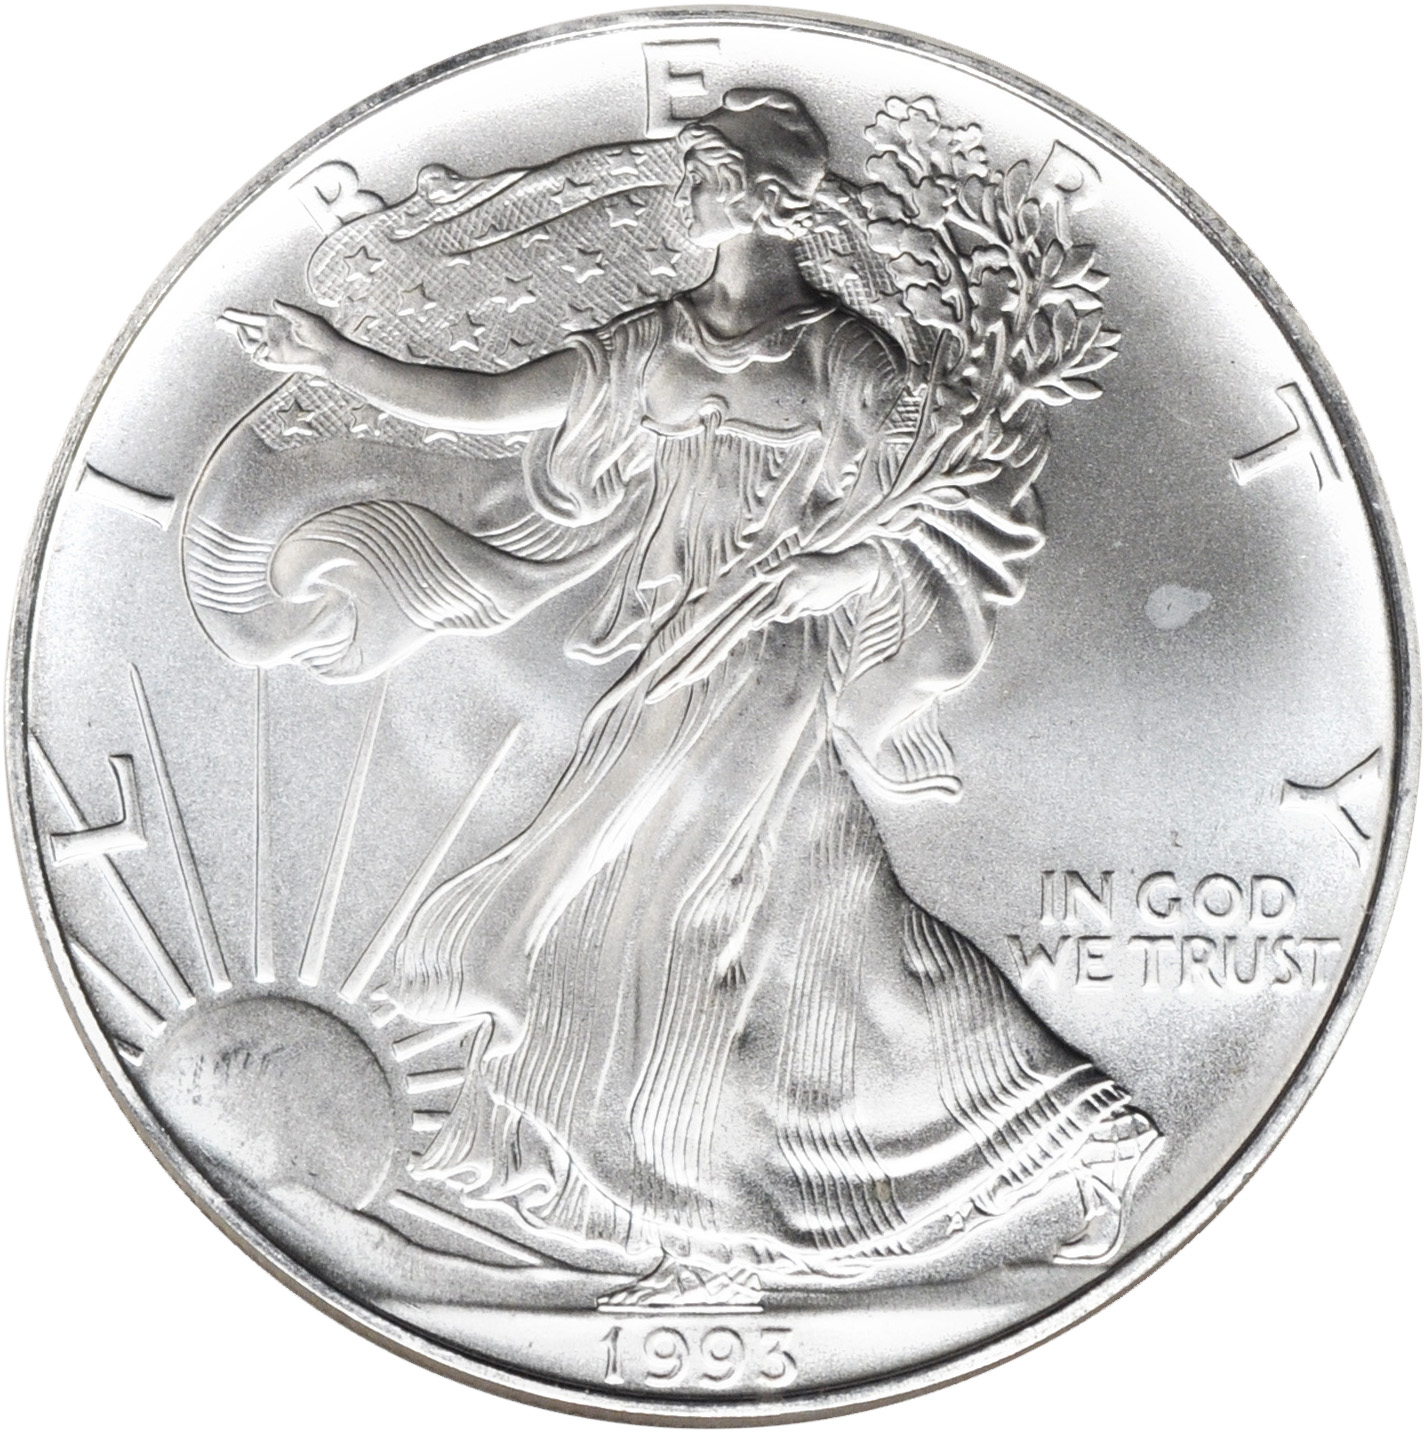 silver 1993 value eagle coin american coins approximate current